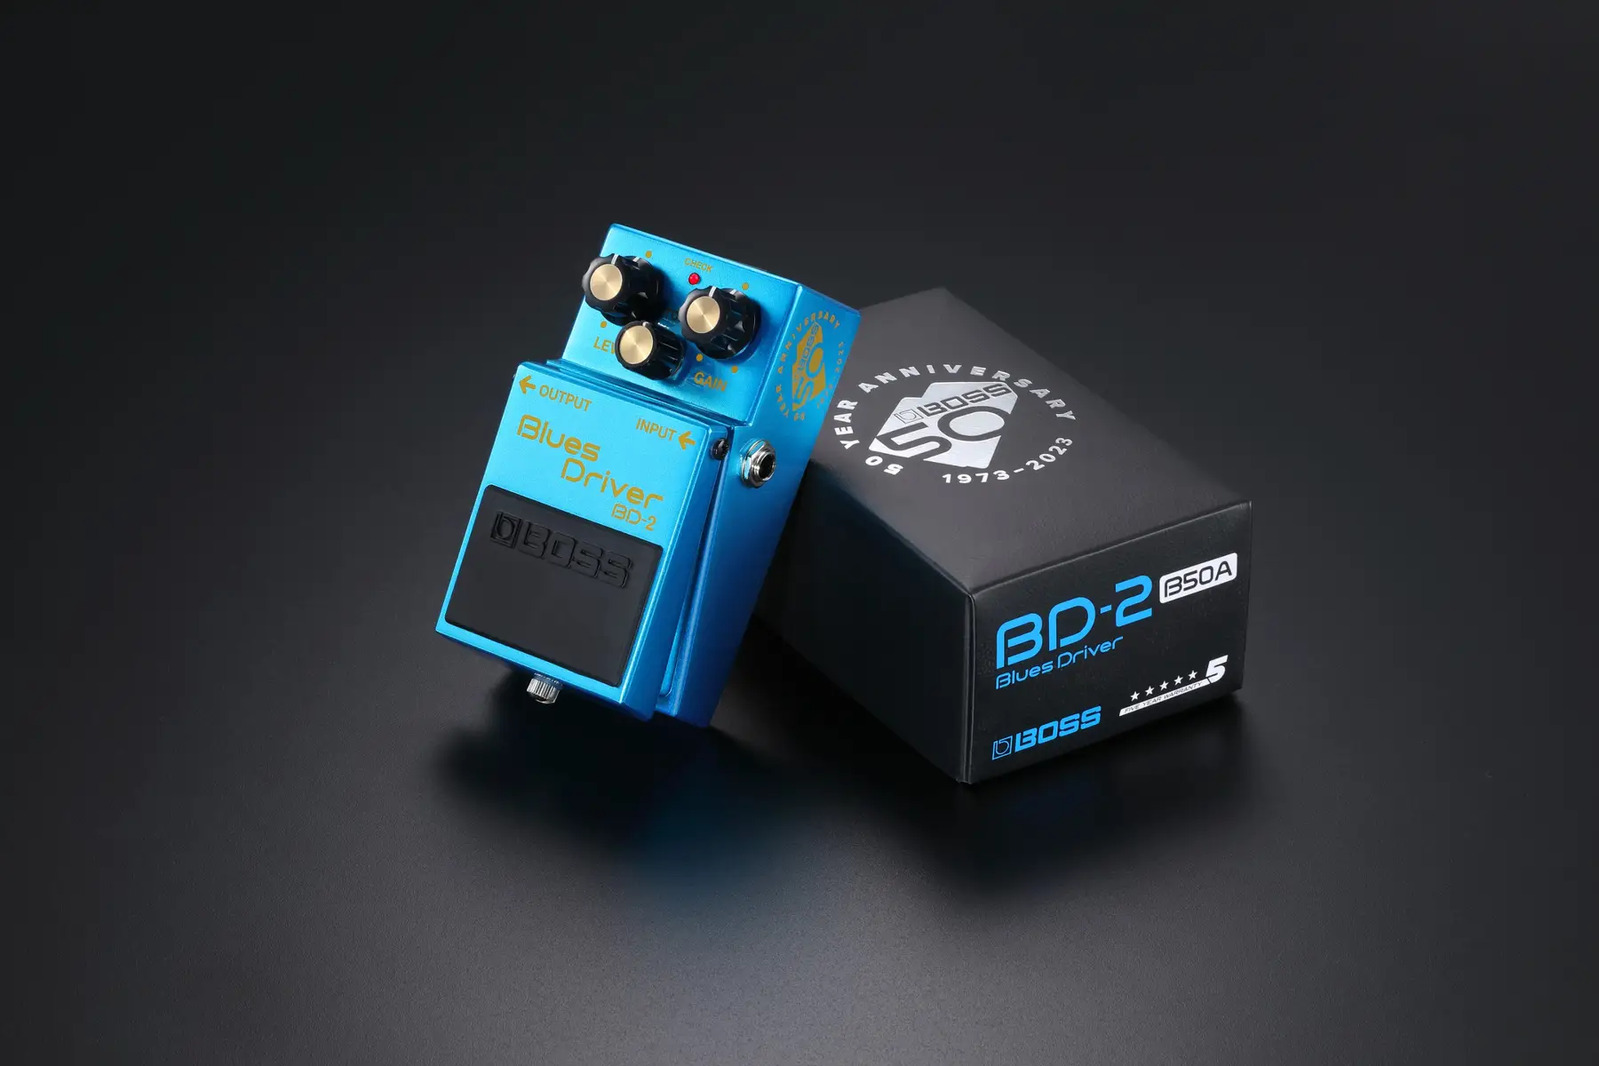 Boss BD-2-B50A Limited Edition 50th Anniversary Blues Driver Pedal